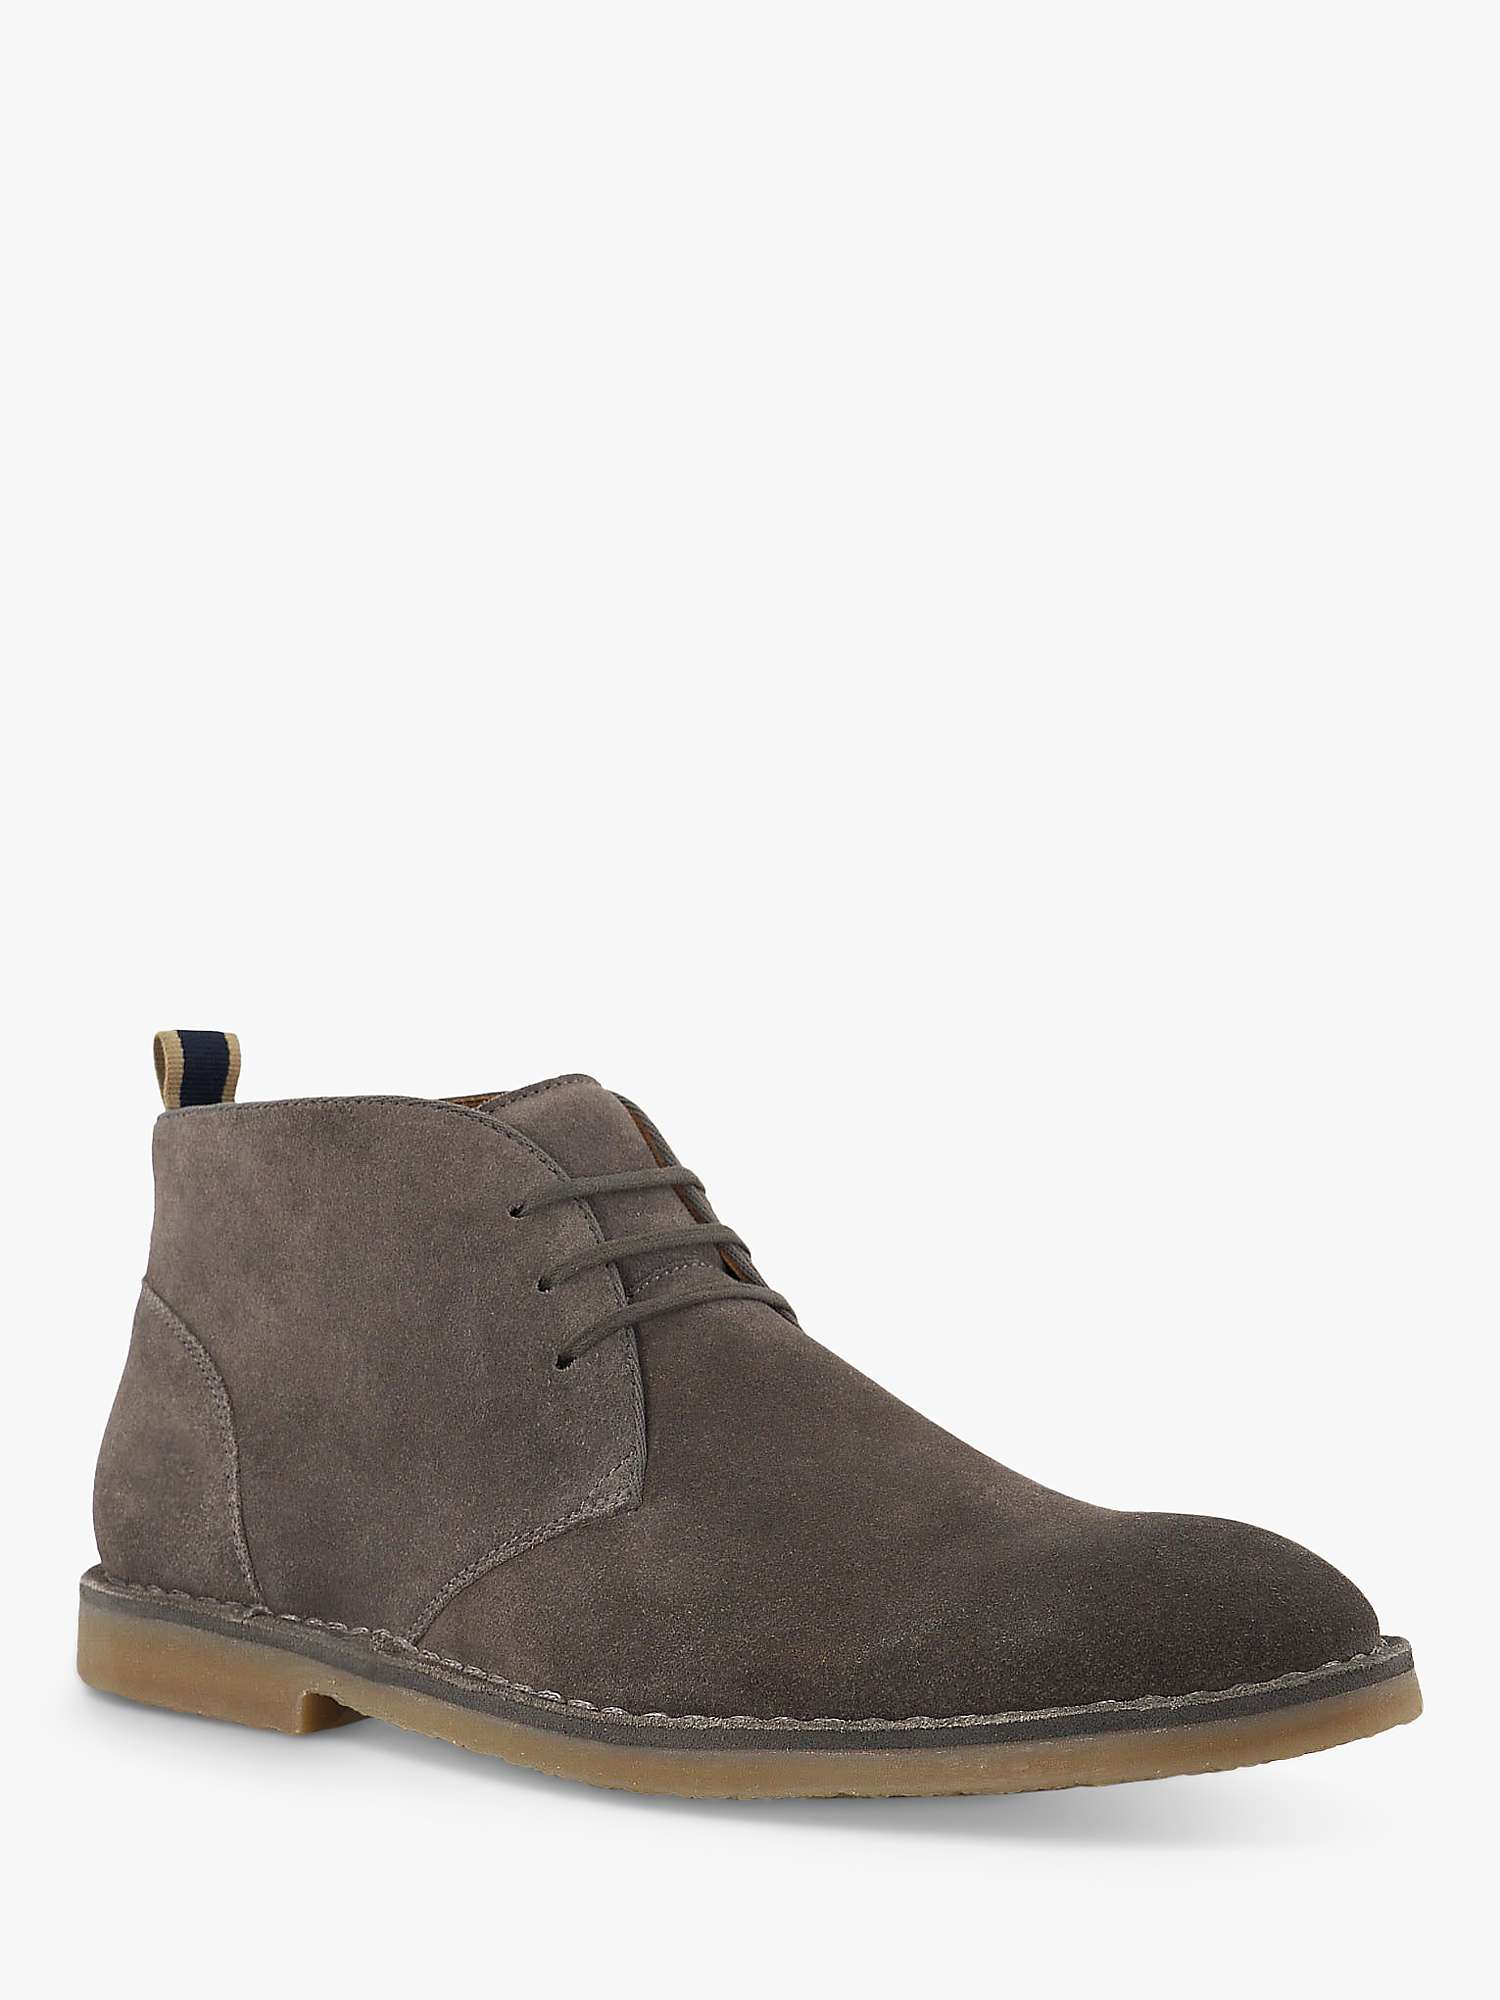 Buy Dune Cashed Suede Casual Chukka Boots Online at johnlewis.com